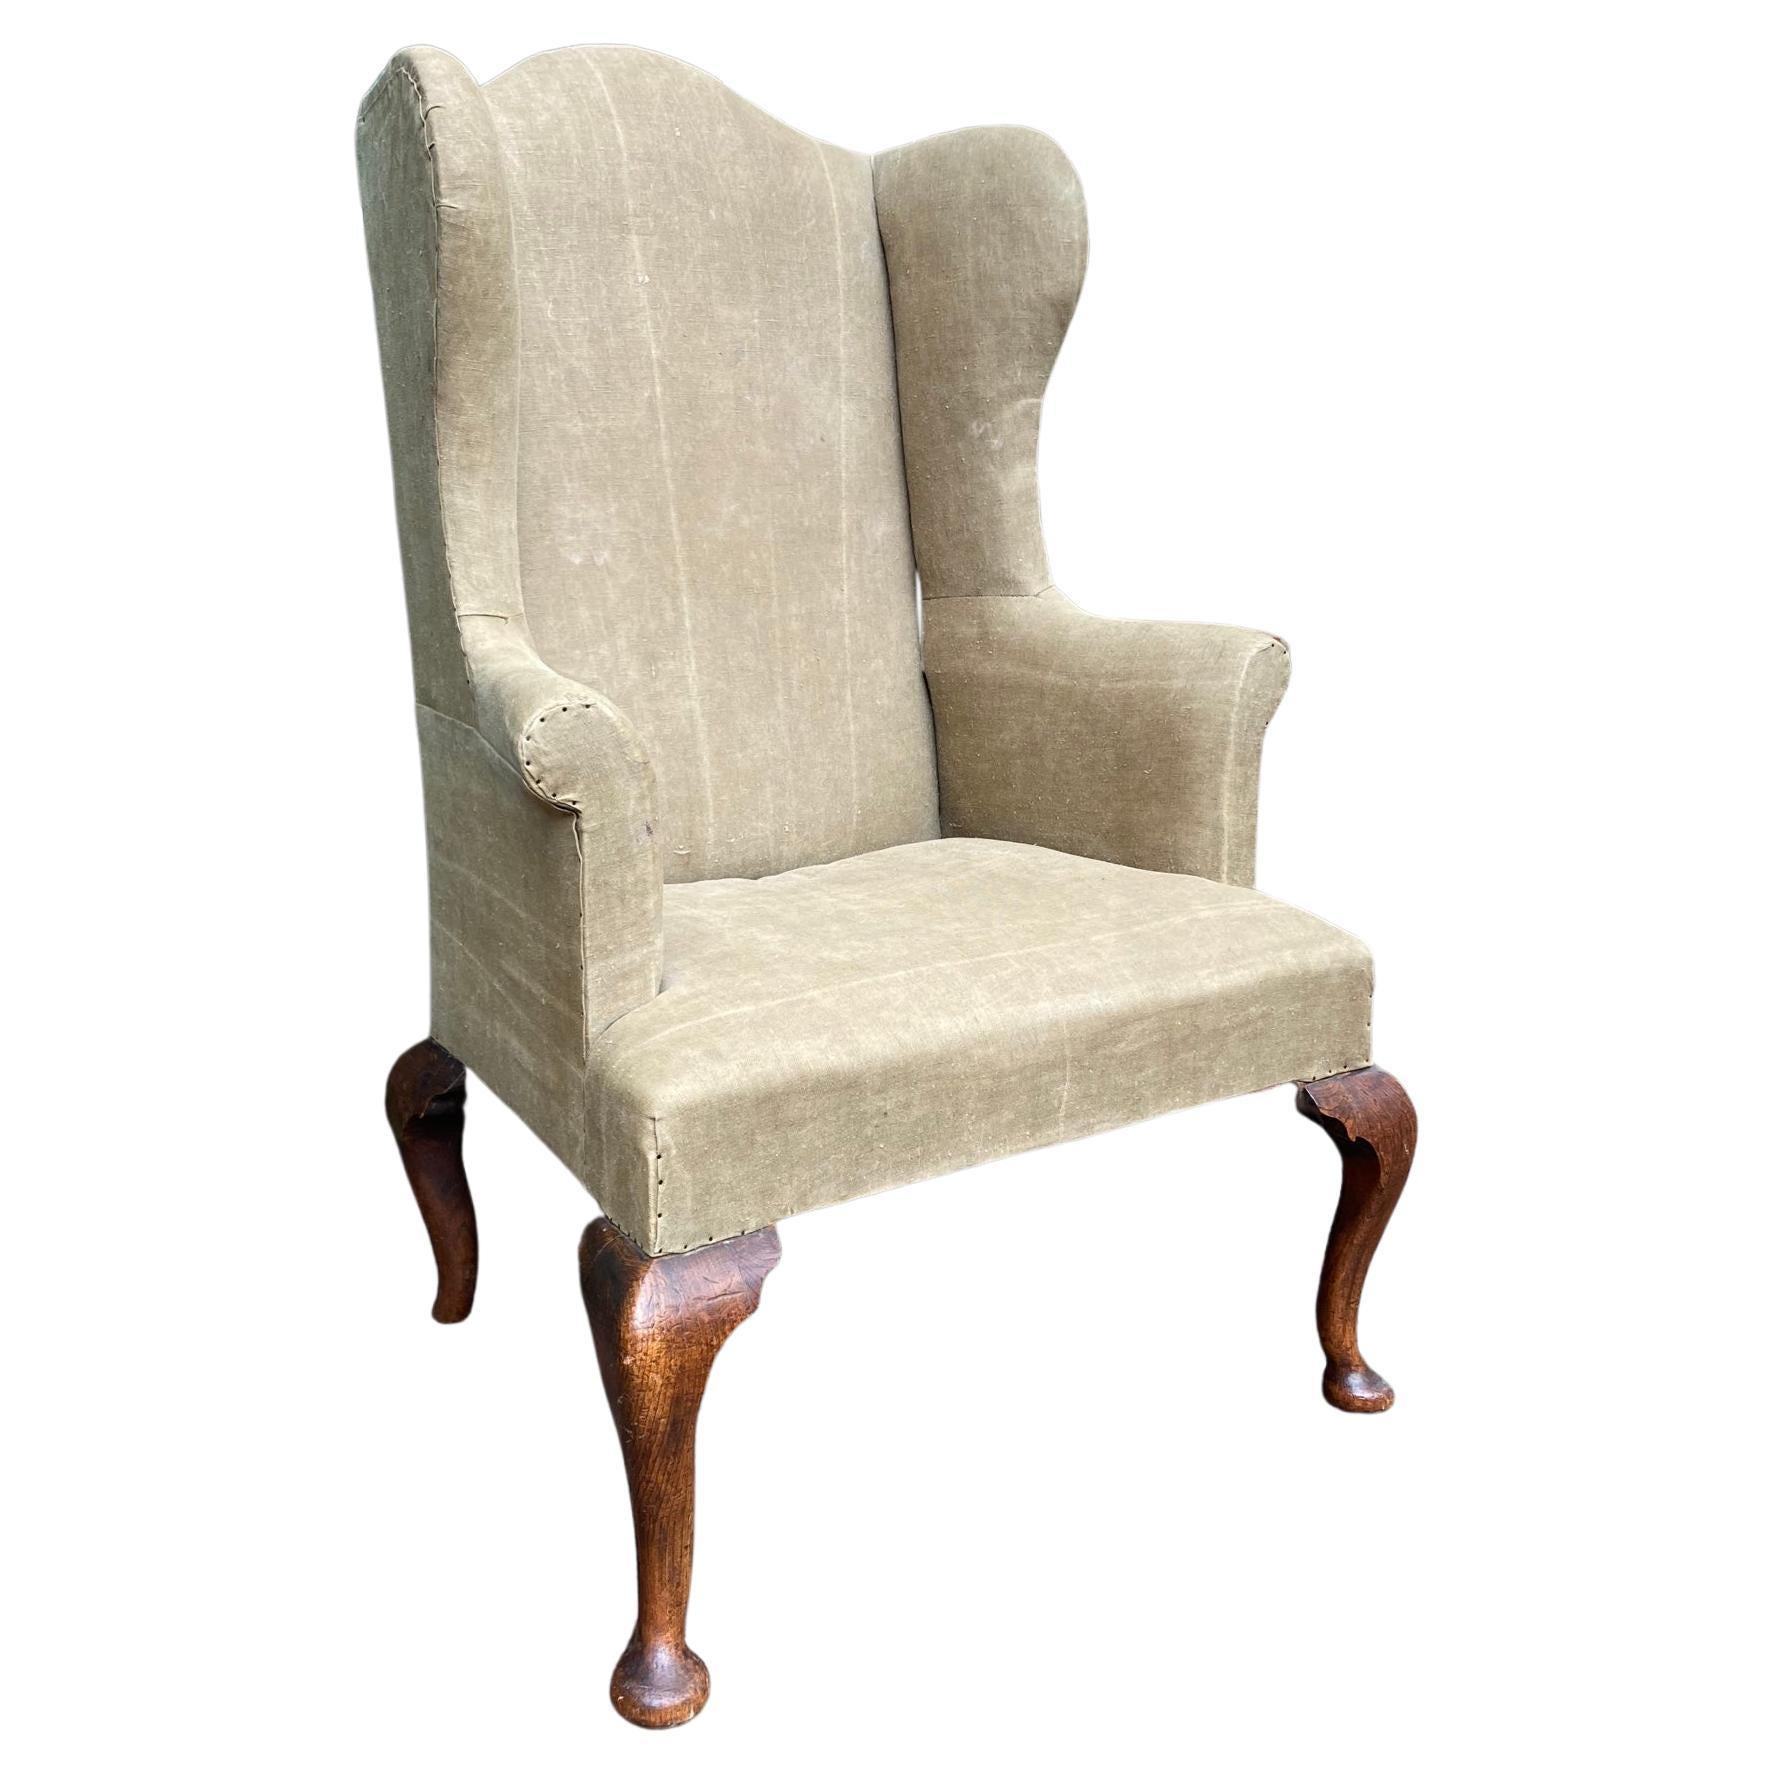 Georgian Overscaled Elm Cabriole Leg Wing Chair For Sale